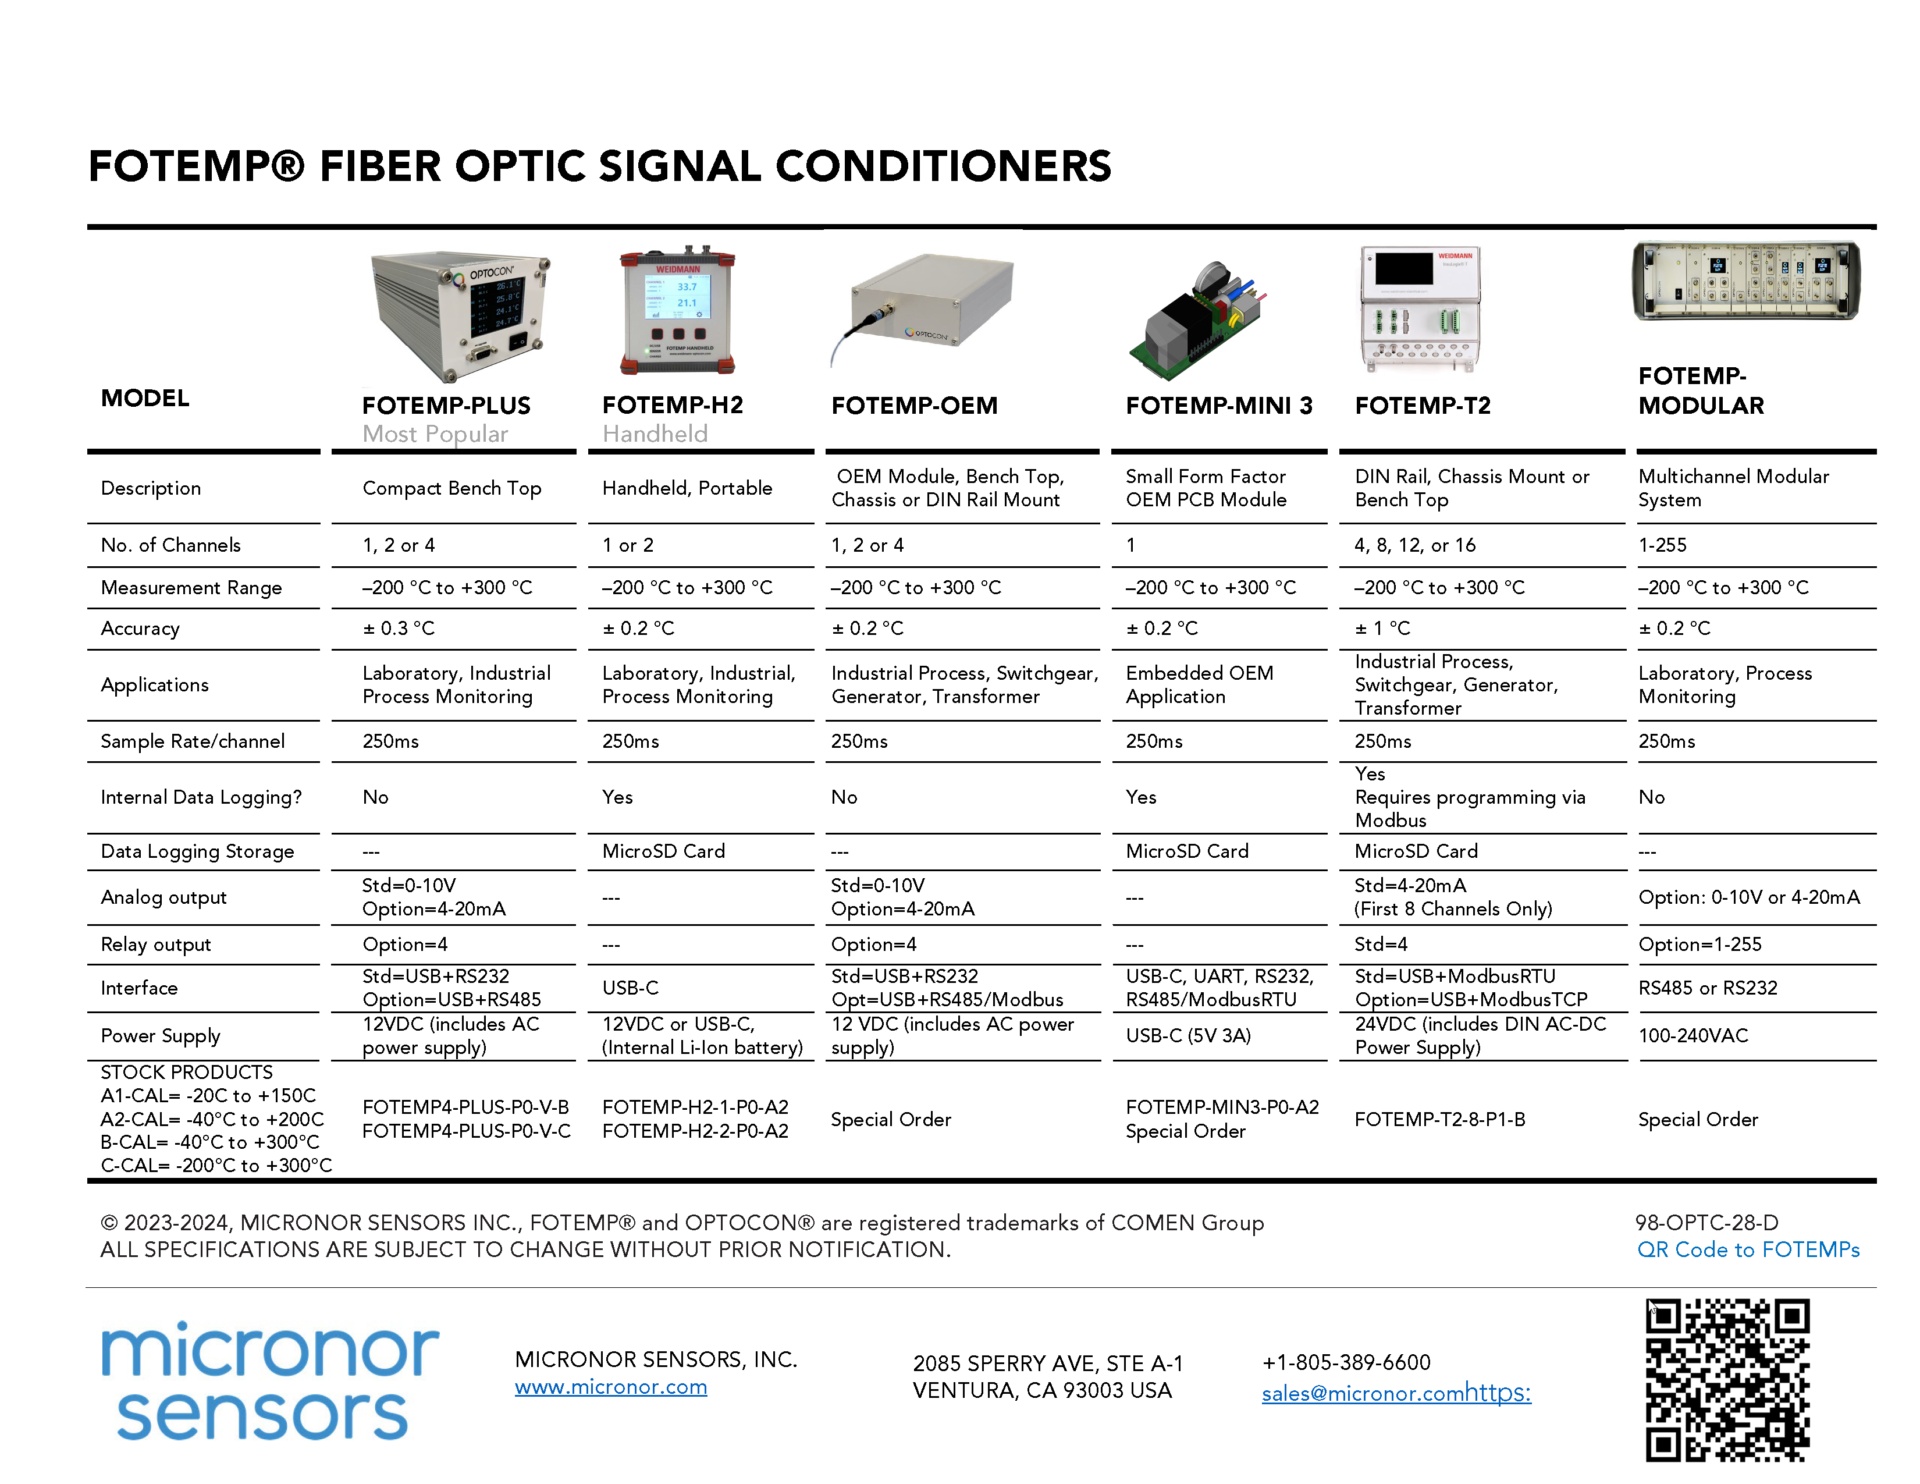 FOTEMP signal conditioners for use with TS series fiber optic temperature probes